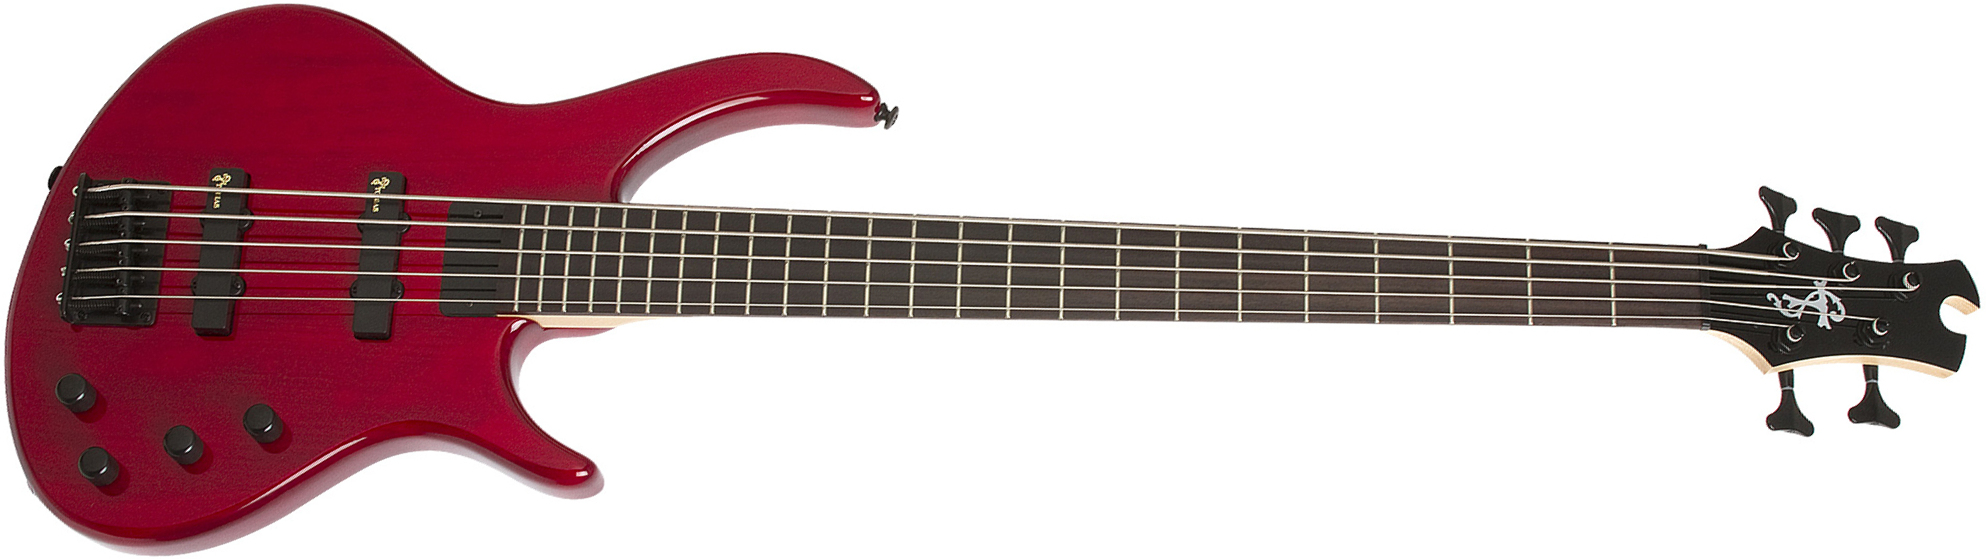 Epiphone Toby Deluxe V Bass Bh - Trans Red - Solid body elektrische bas - Main picture